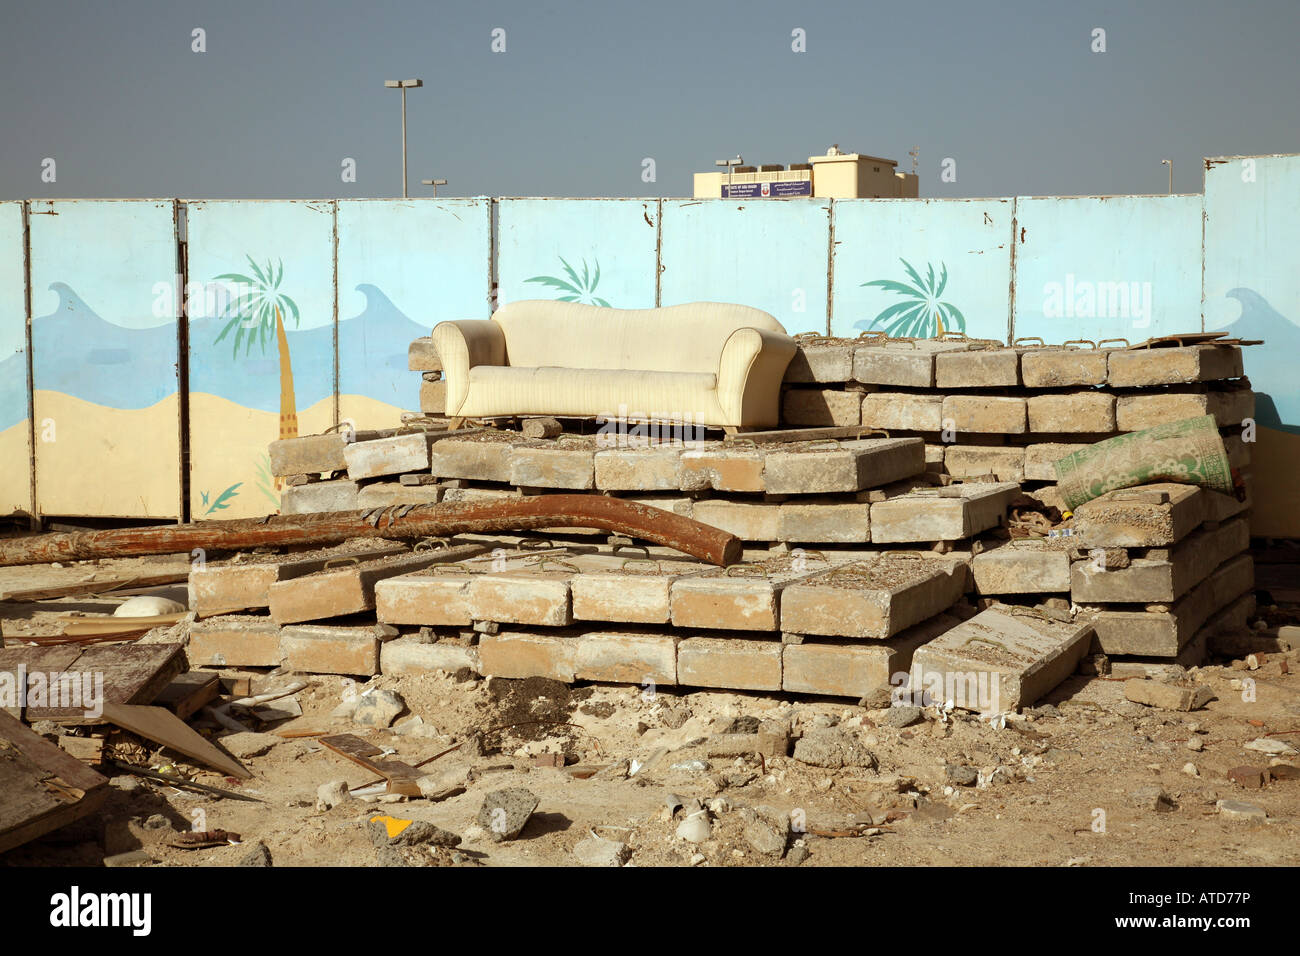 A pile of rubbish on a tip, Abu Dhabi city, UAE Stock Photo